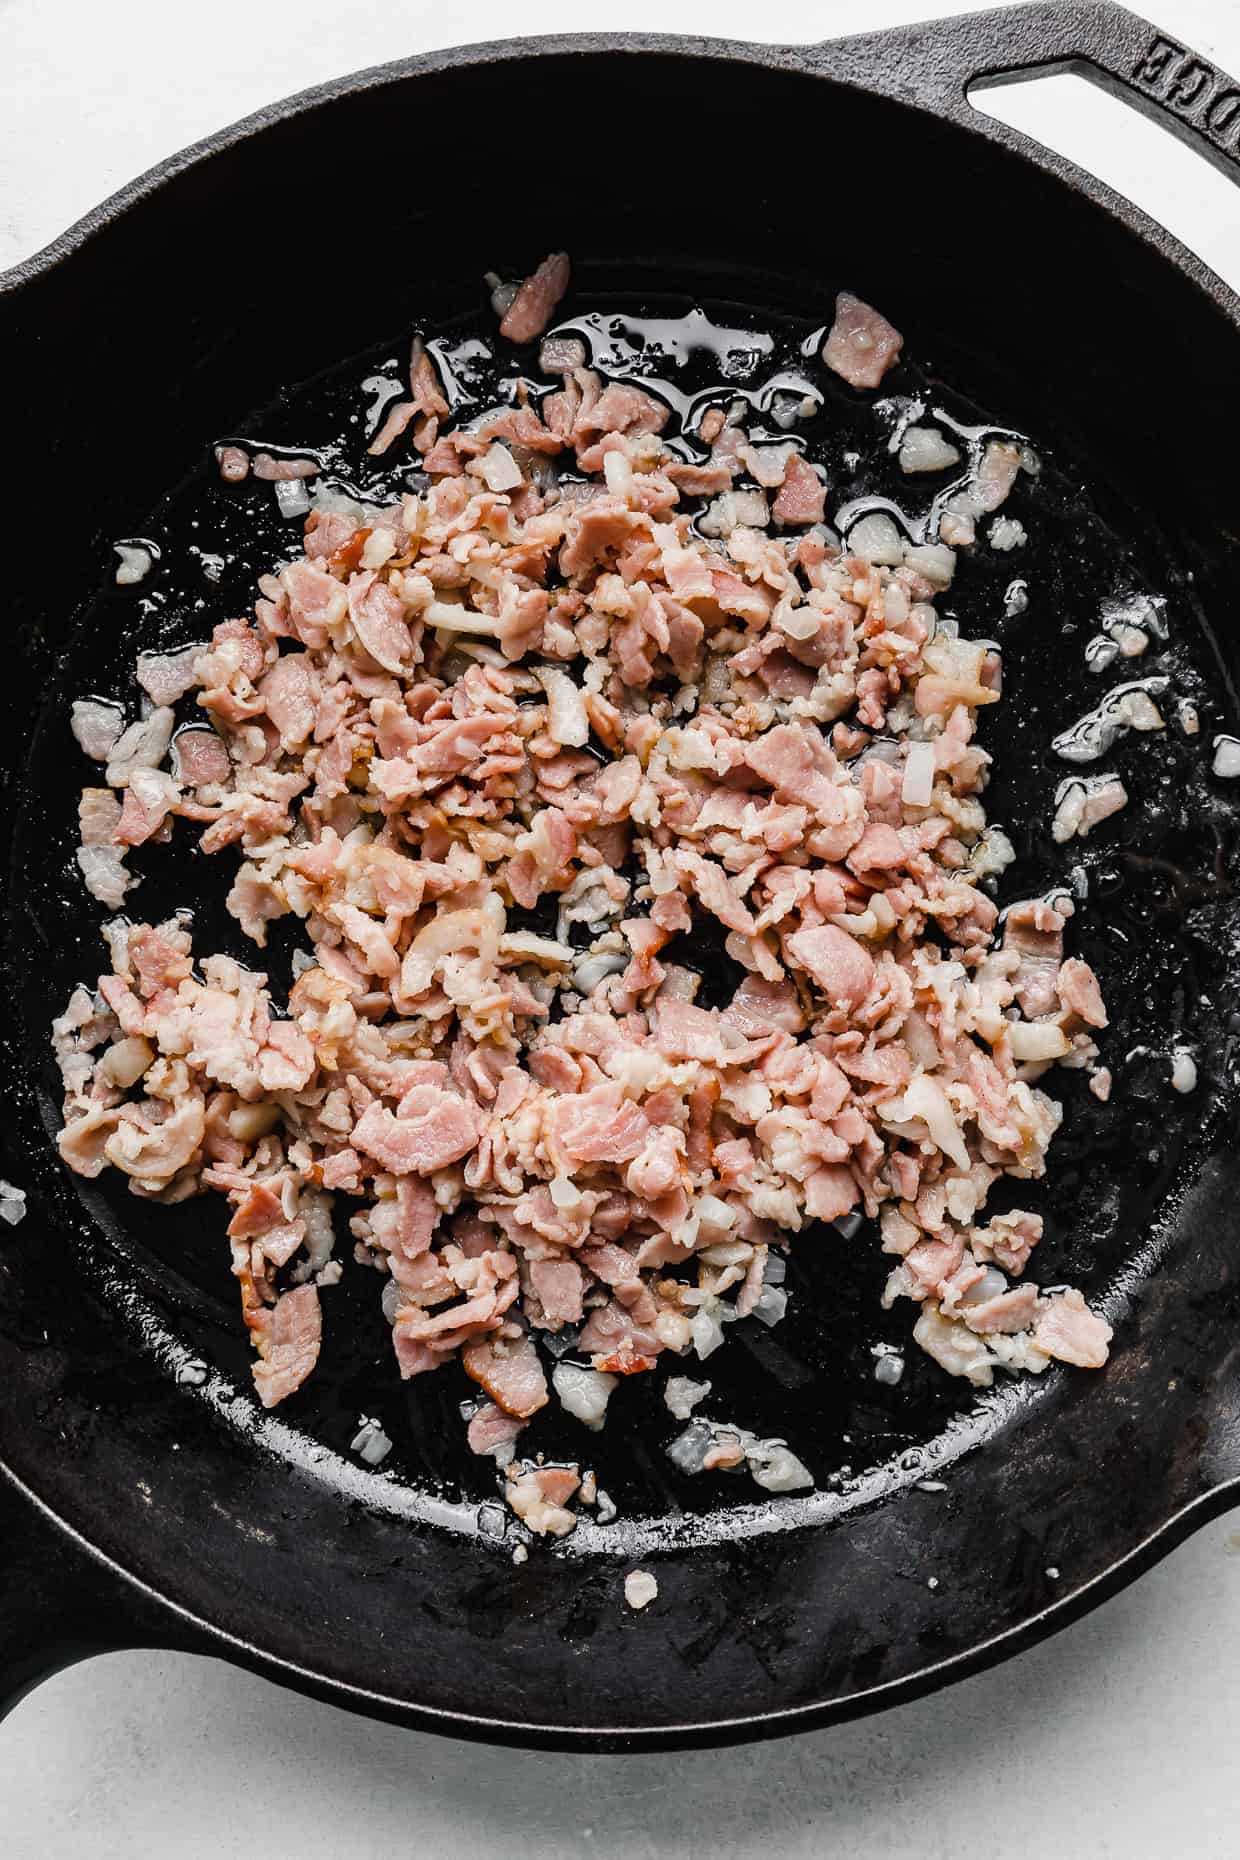 Slightly cooked bacon and diced onion in a cast iron skillet.